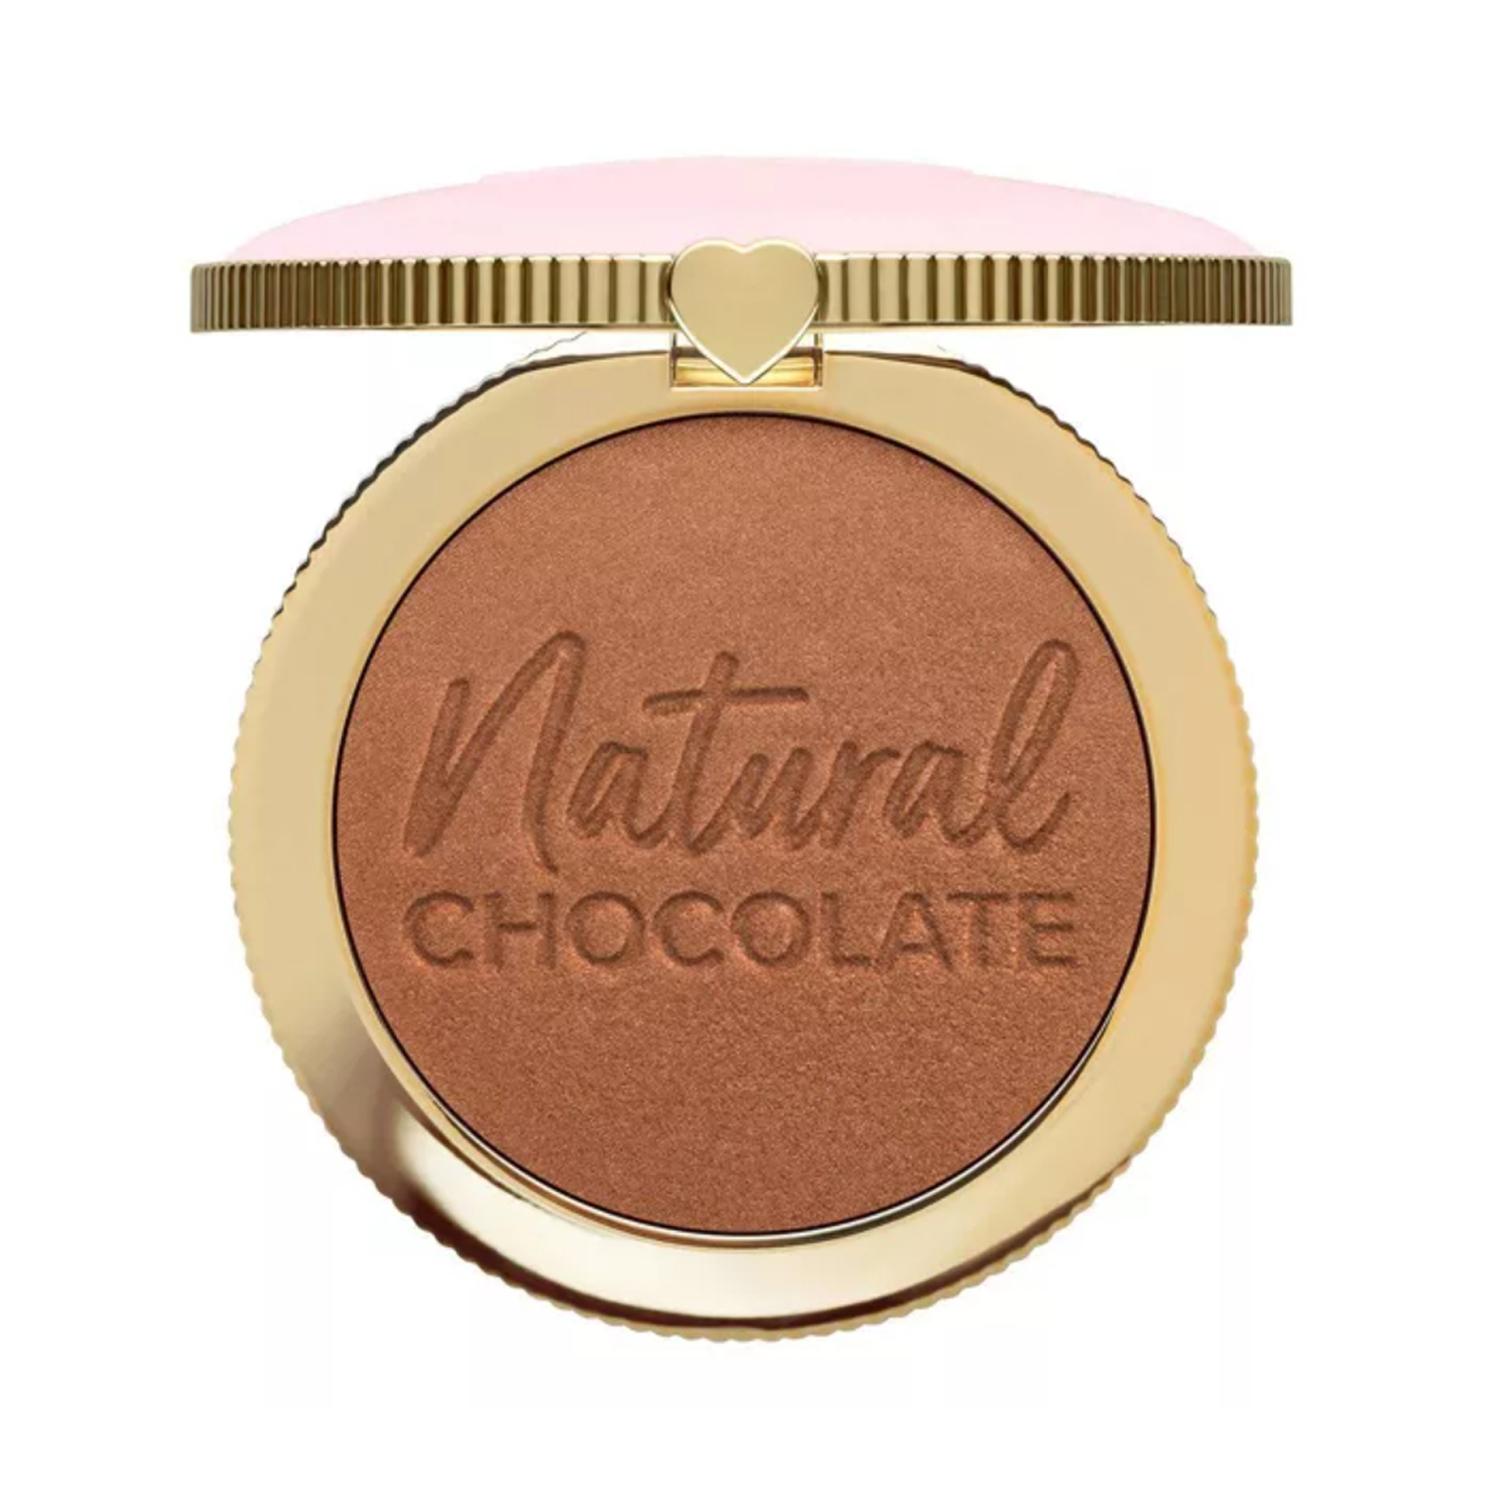 too faced chocolate soleil natural chocolate bronzer - golden cocoa (9g)